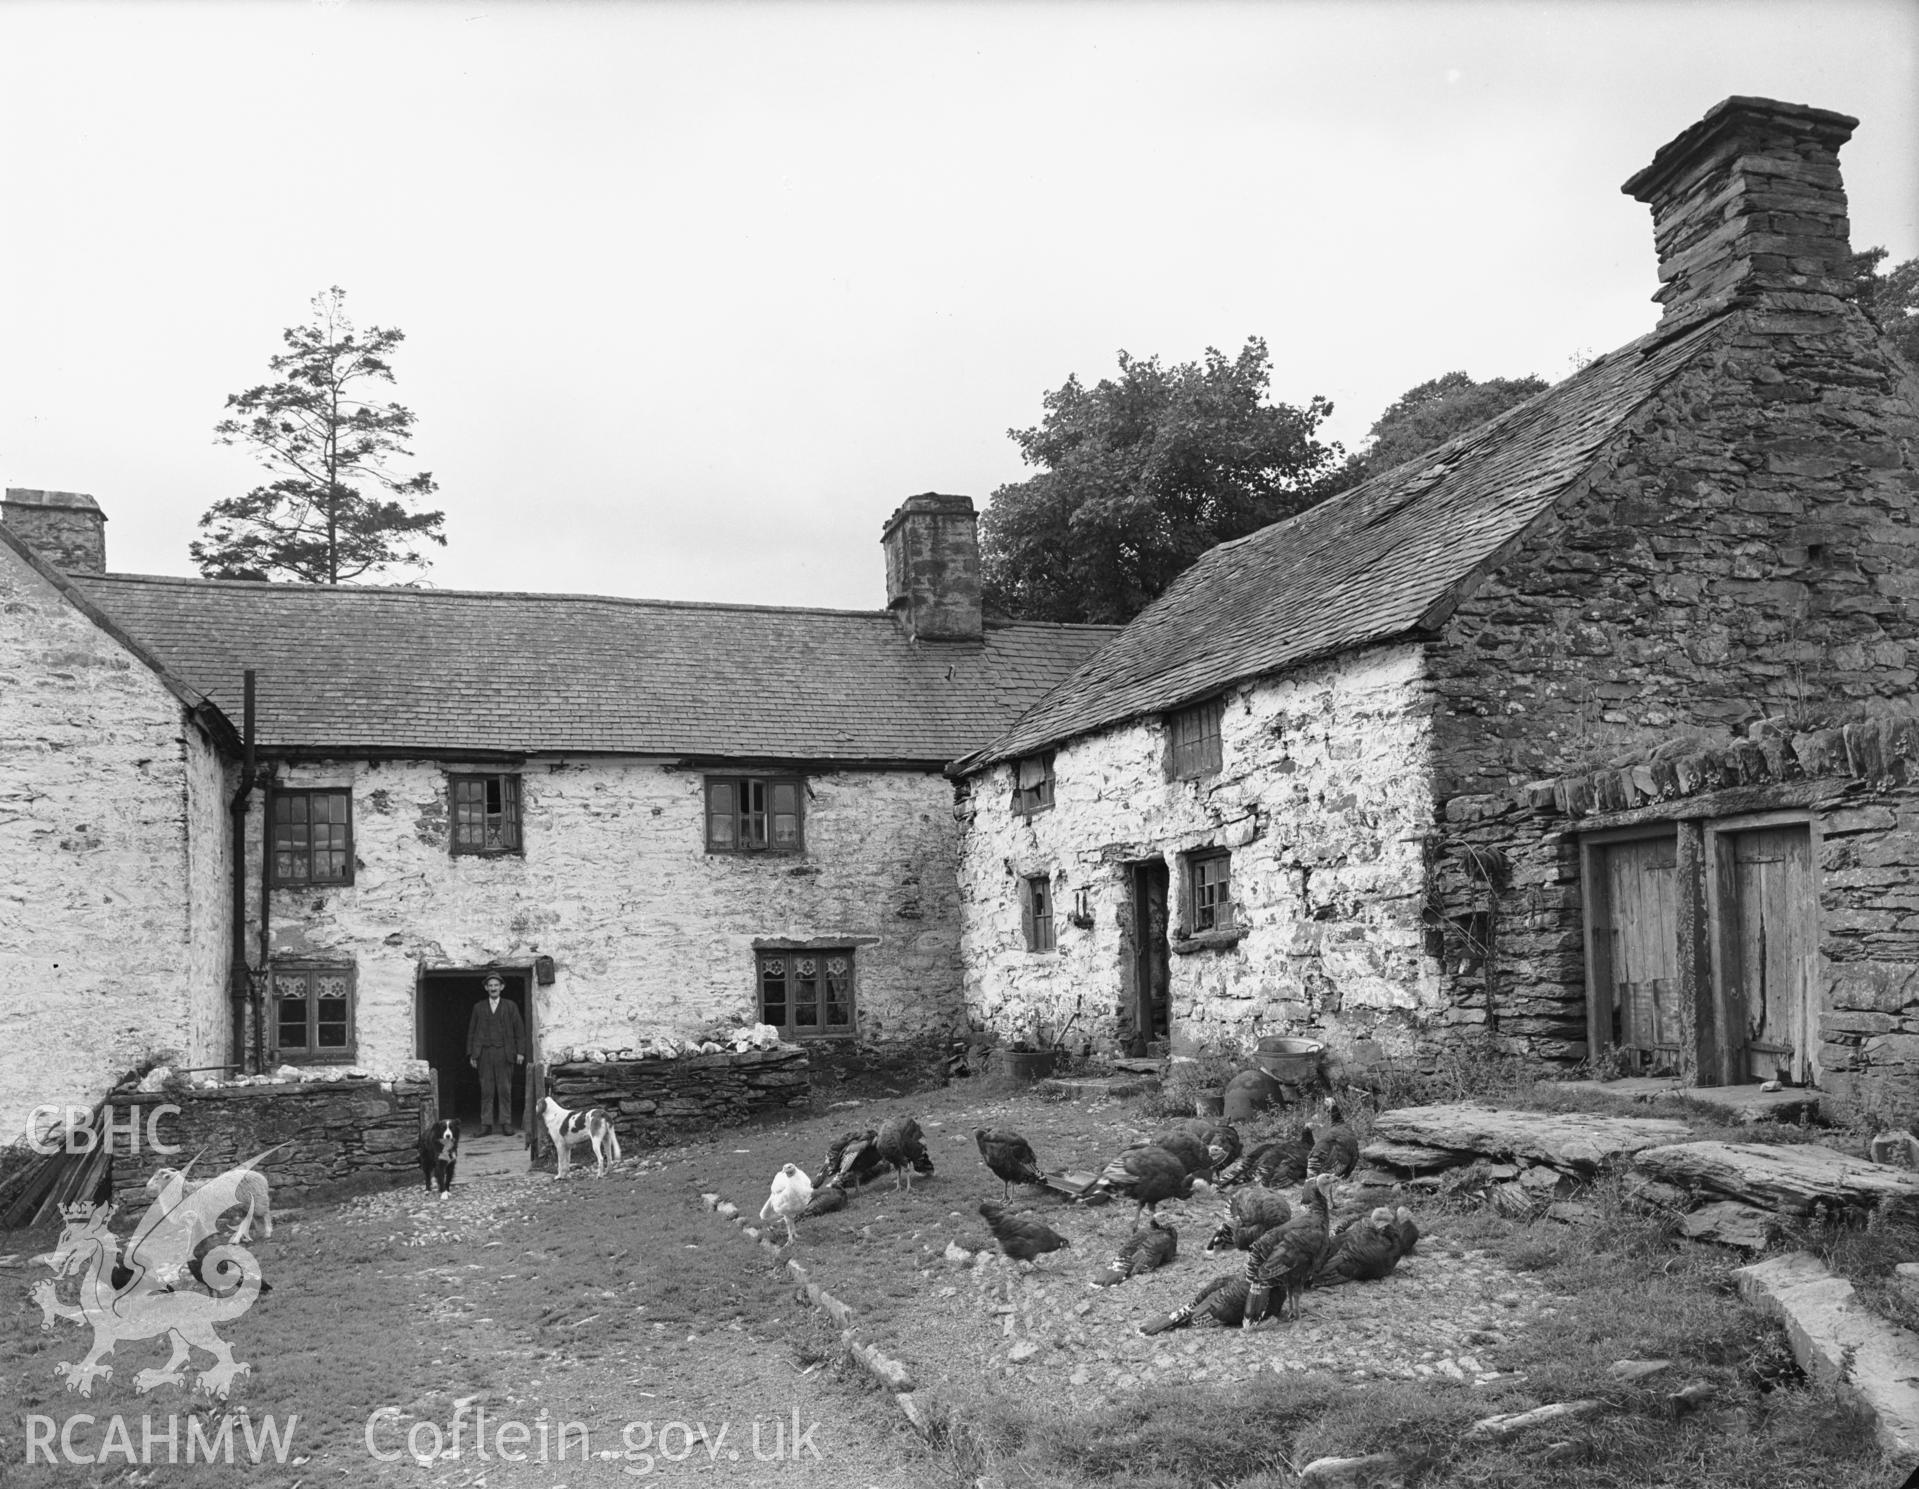 Exterior view showing the farmhouse from the east with the old house on the right.